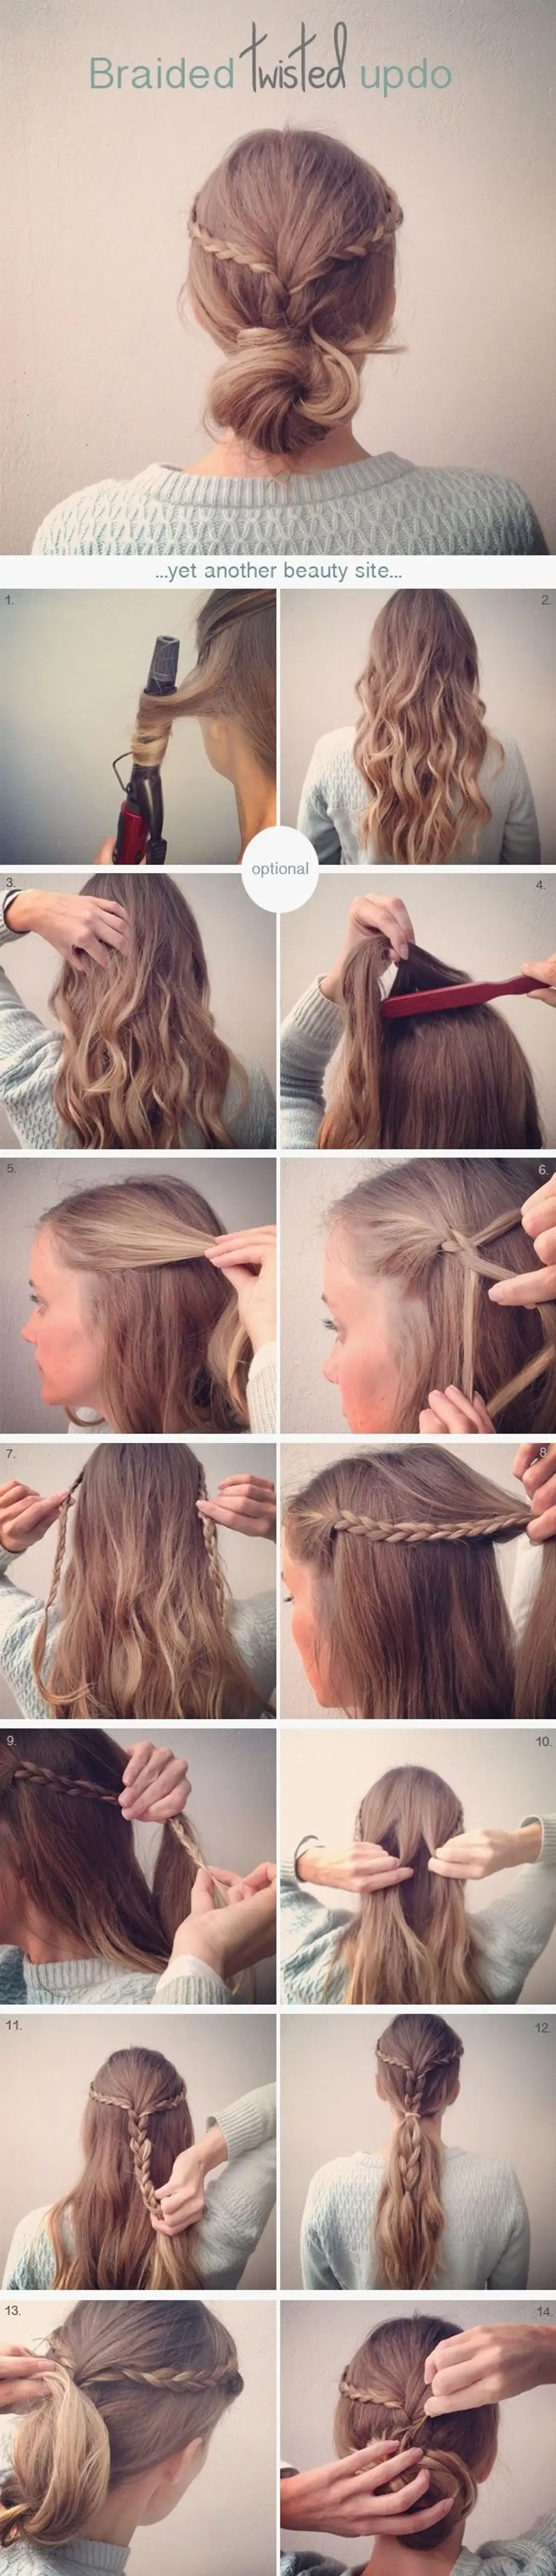 Braided Twisted Updo